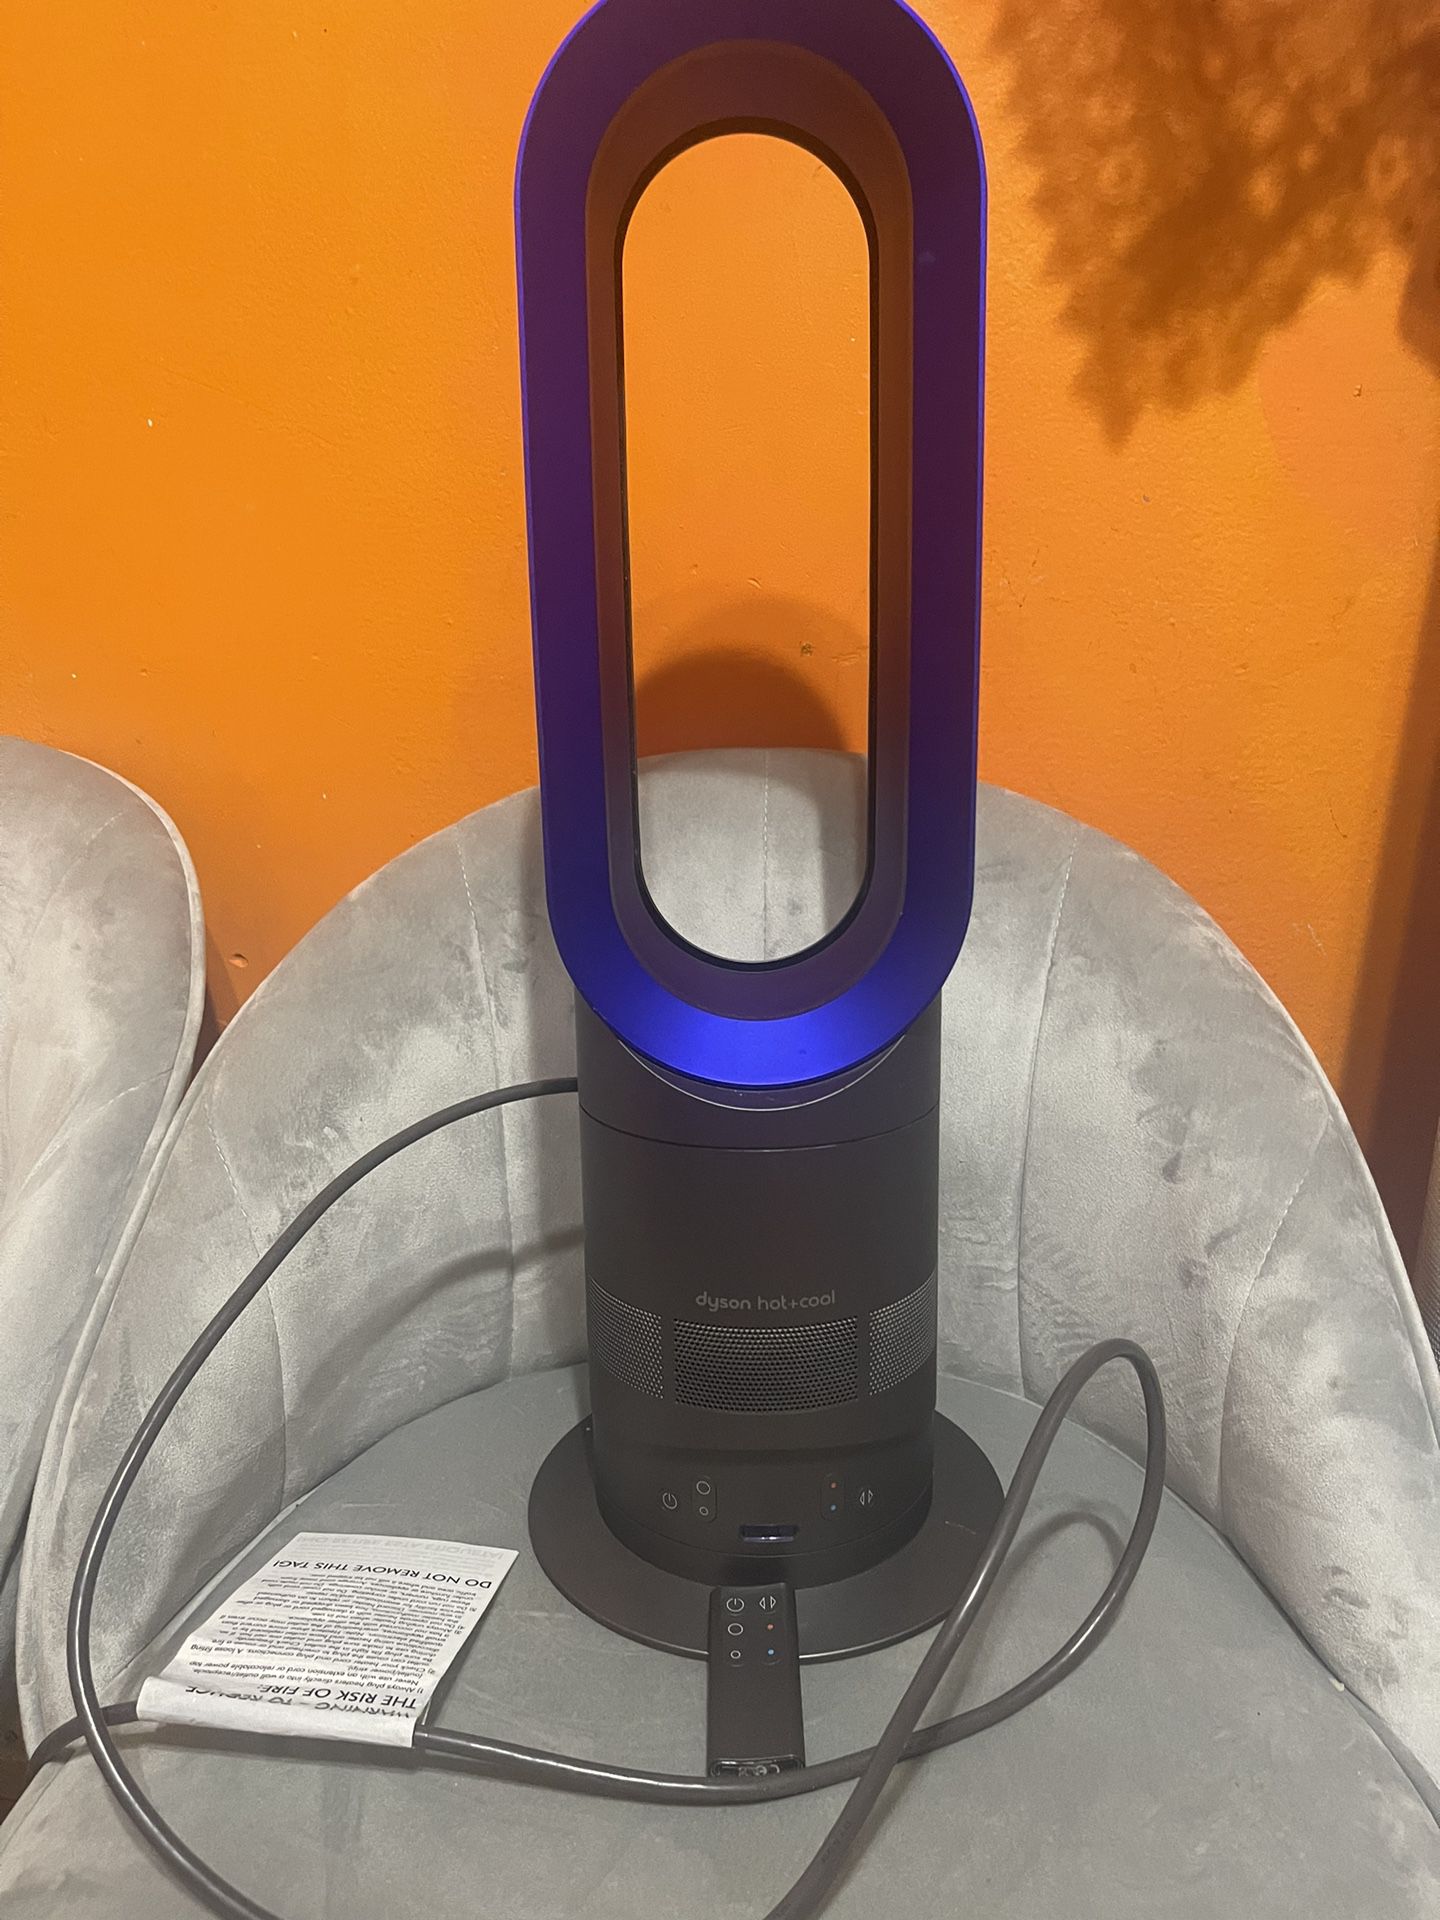 Dyson hot- cool